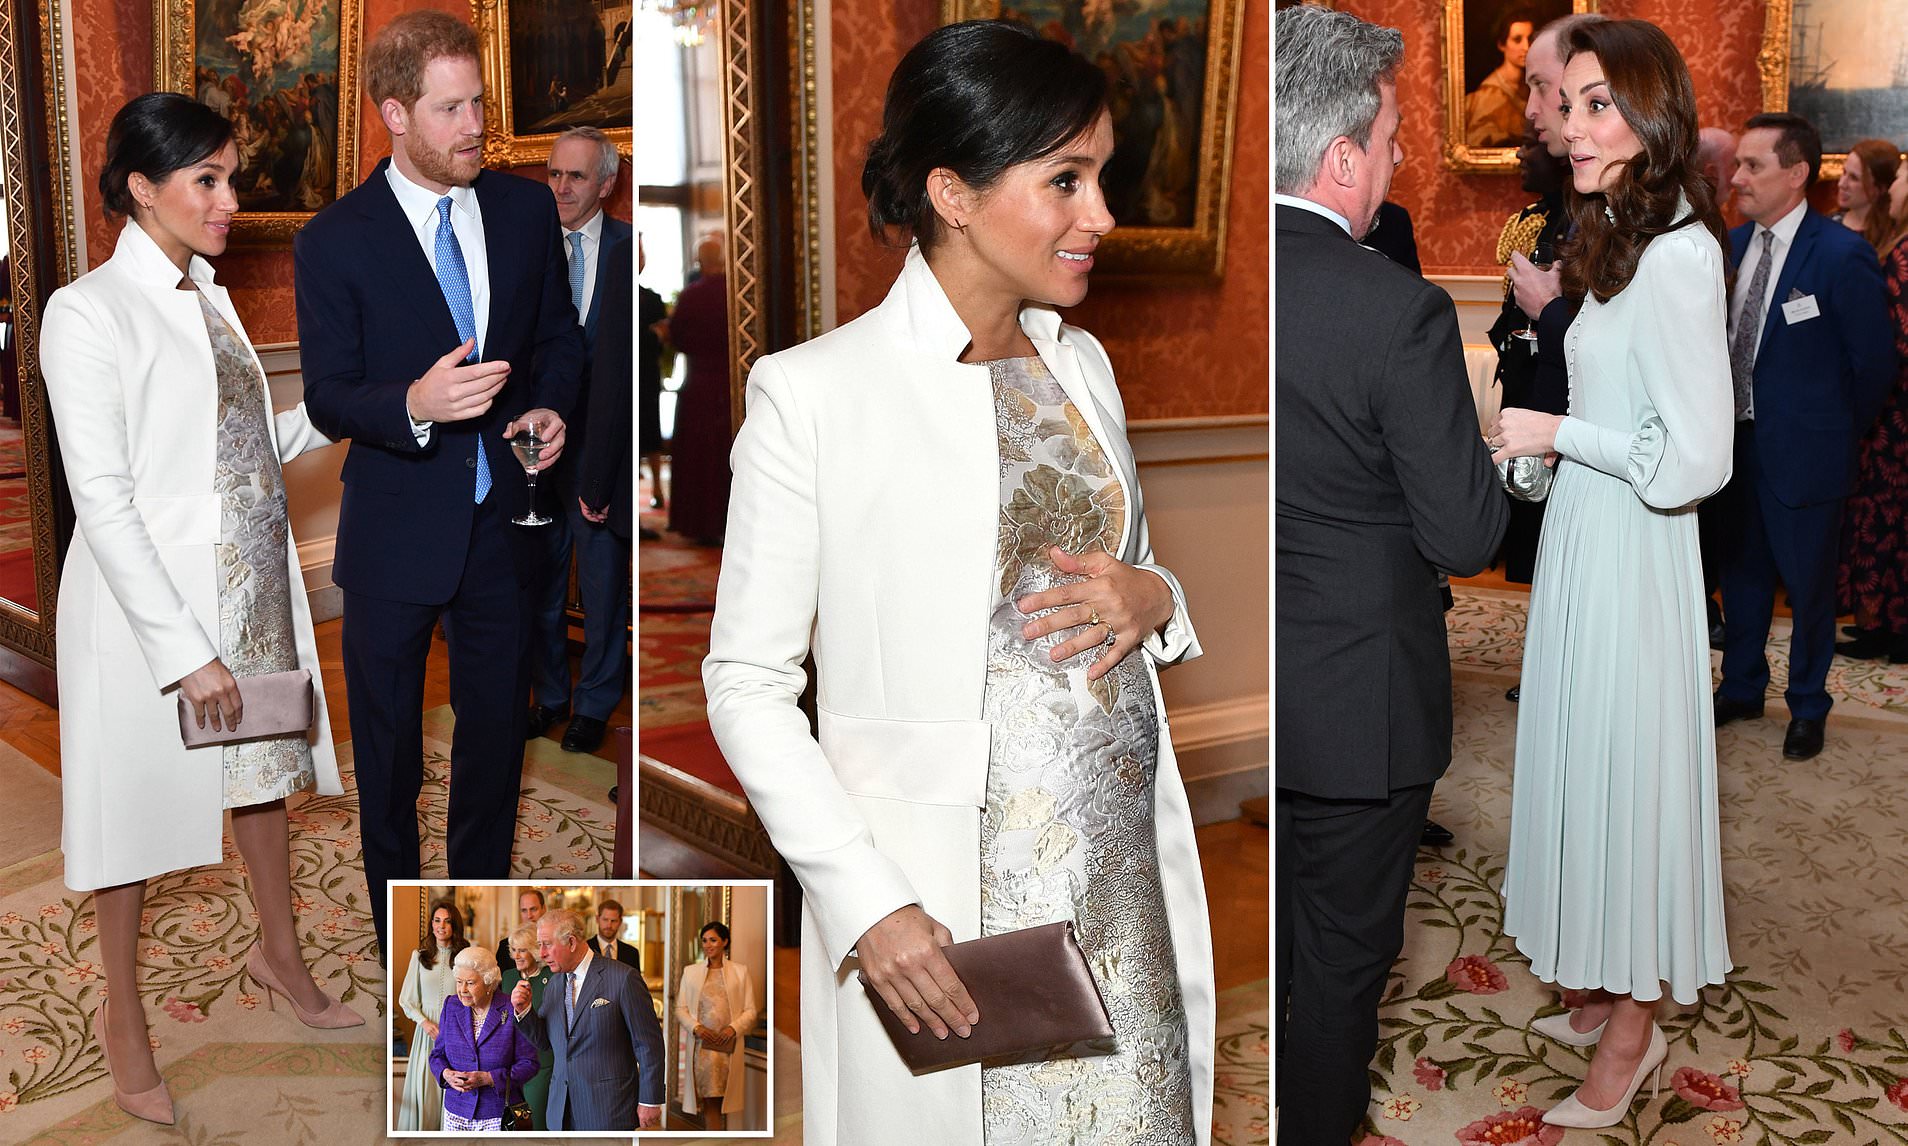 Meghan and Kate reunited! Duchesses make a rare joint appearance as the Queen hosts a party at Buckingham Palace to mark Charles' 50 years as Prince of Wales